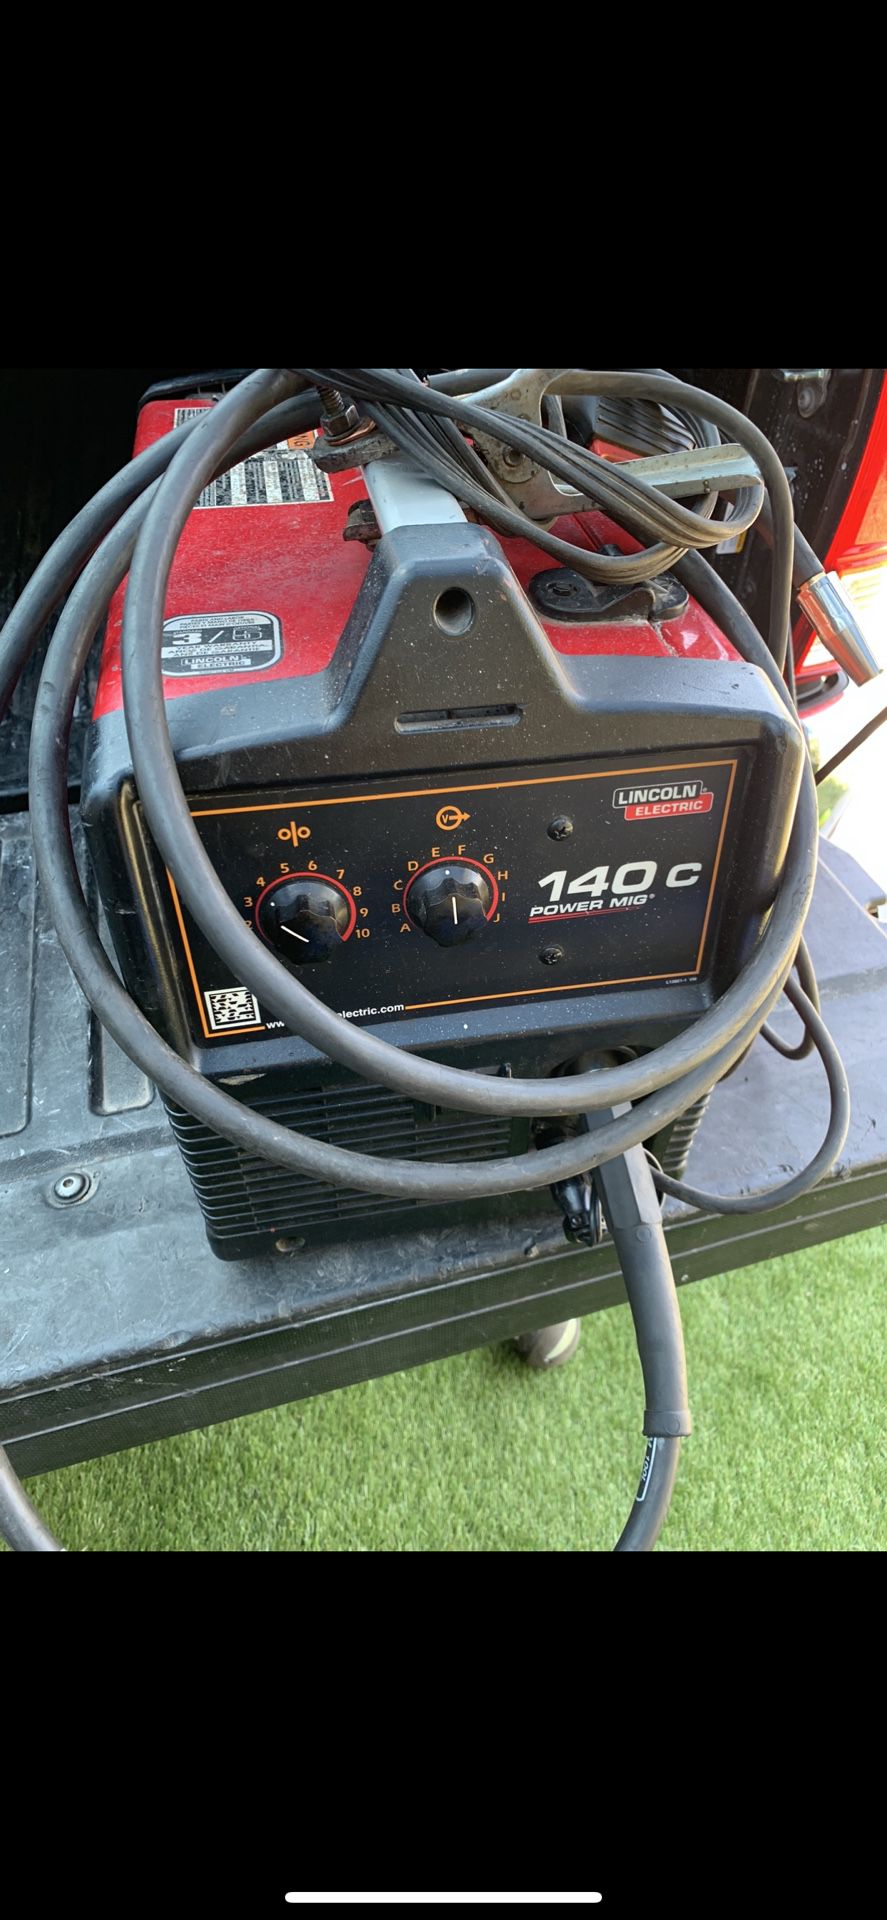 Lincoln 140c power mig welder 110v in very good condition